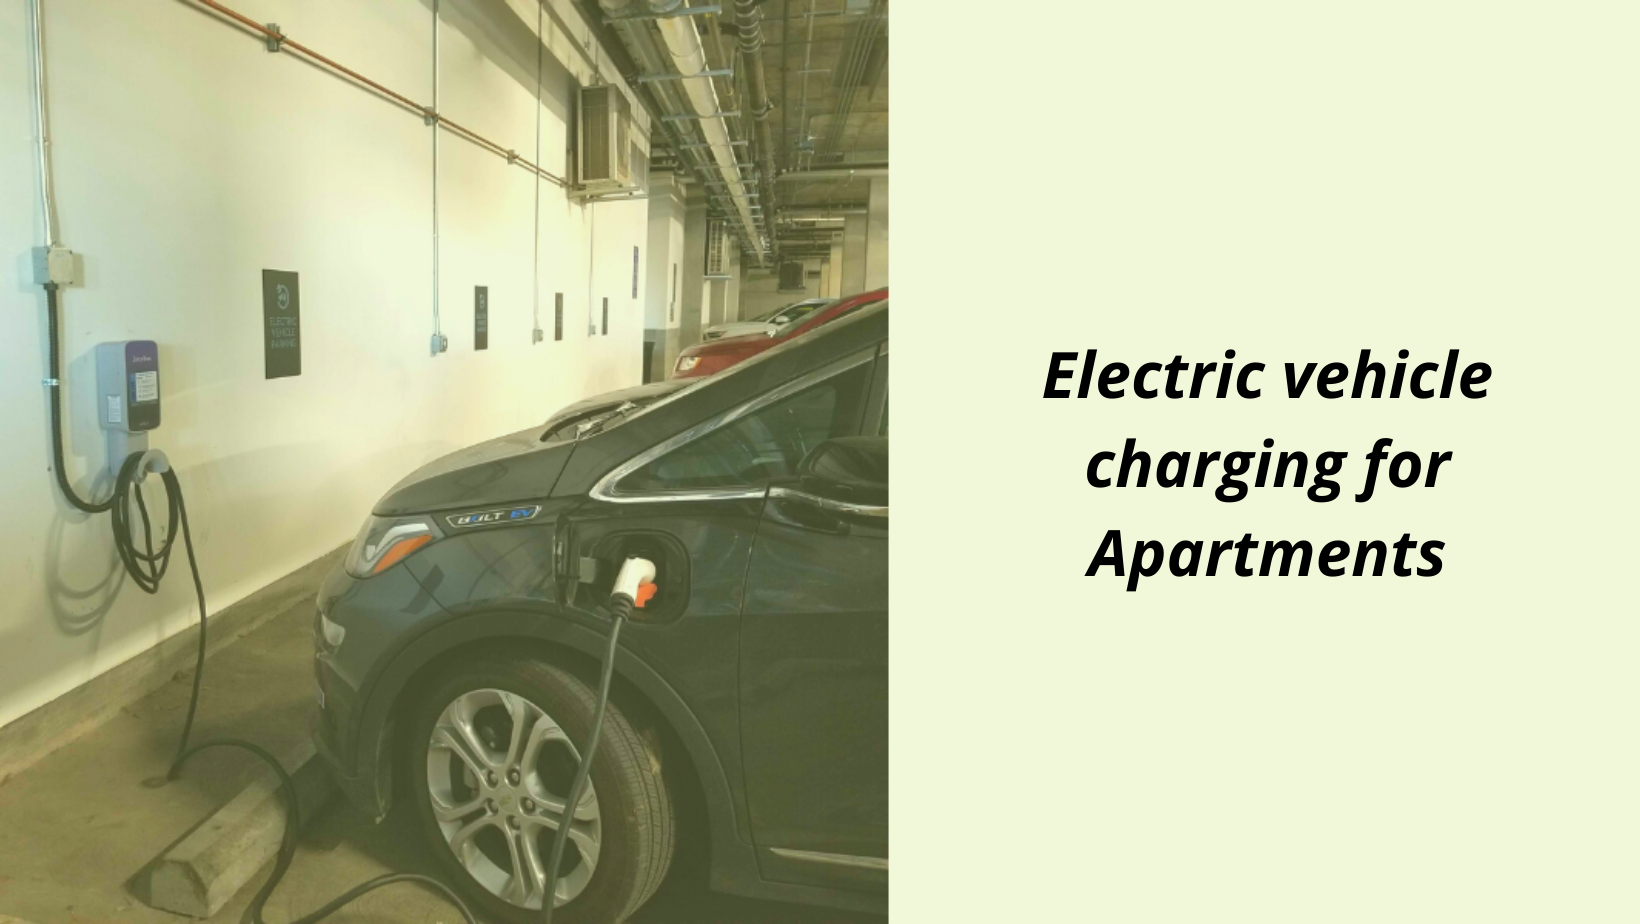 Electric vehicle charging for Apartments